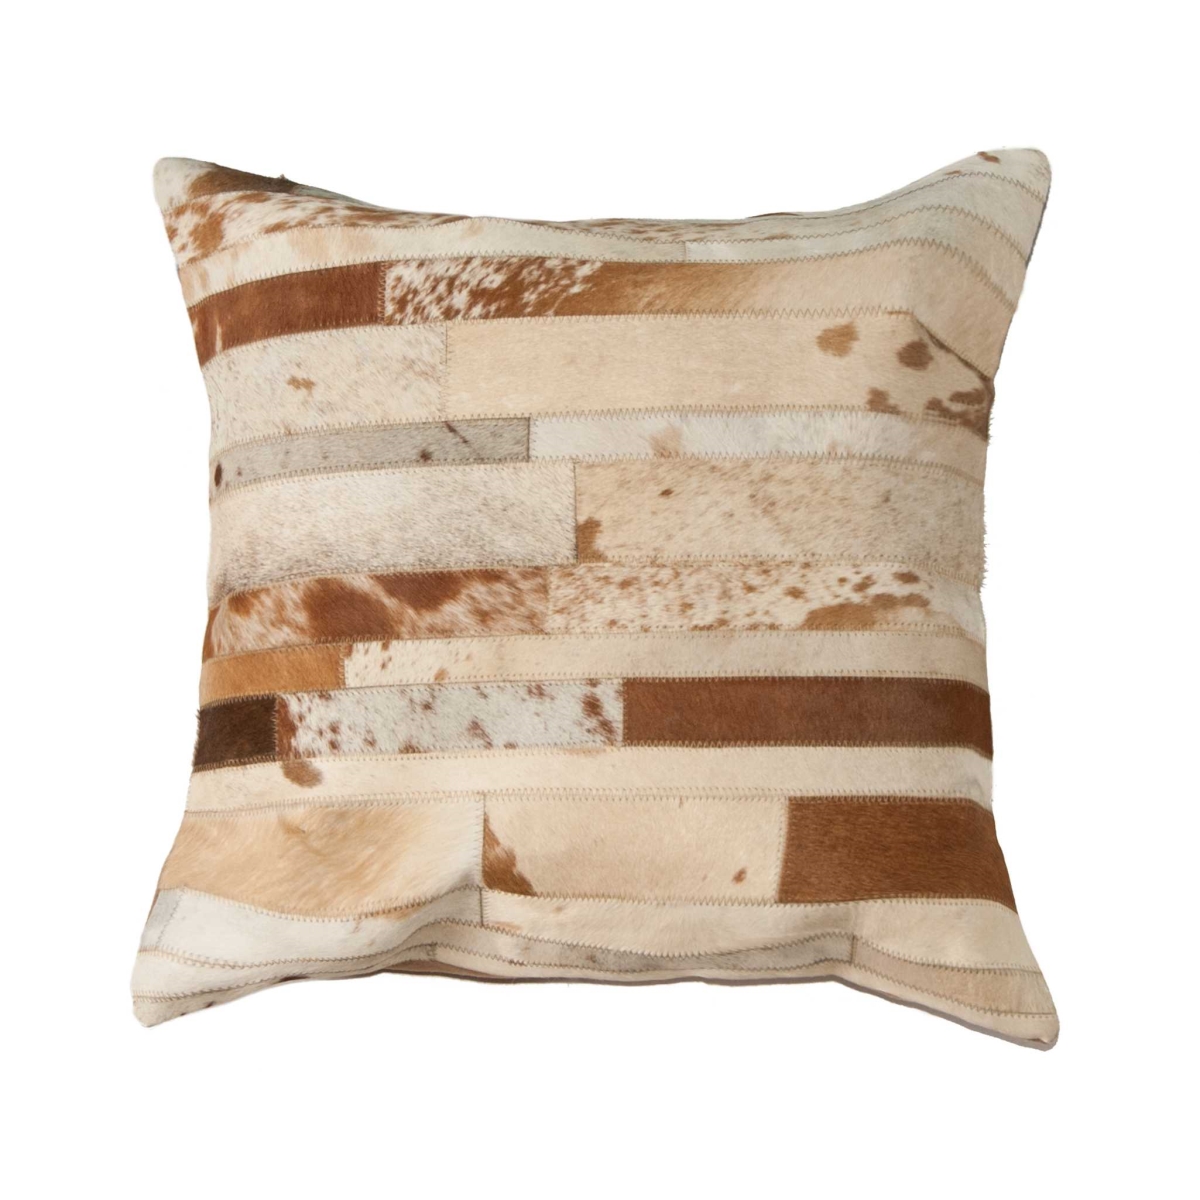 Home Roots Beddings 332305 Torino Classic Large Madrid Cowhide Pillow, Brown & White - 22 X 22 In.